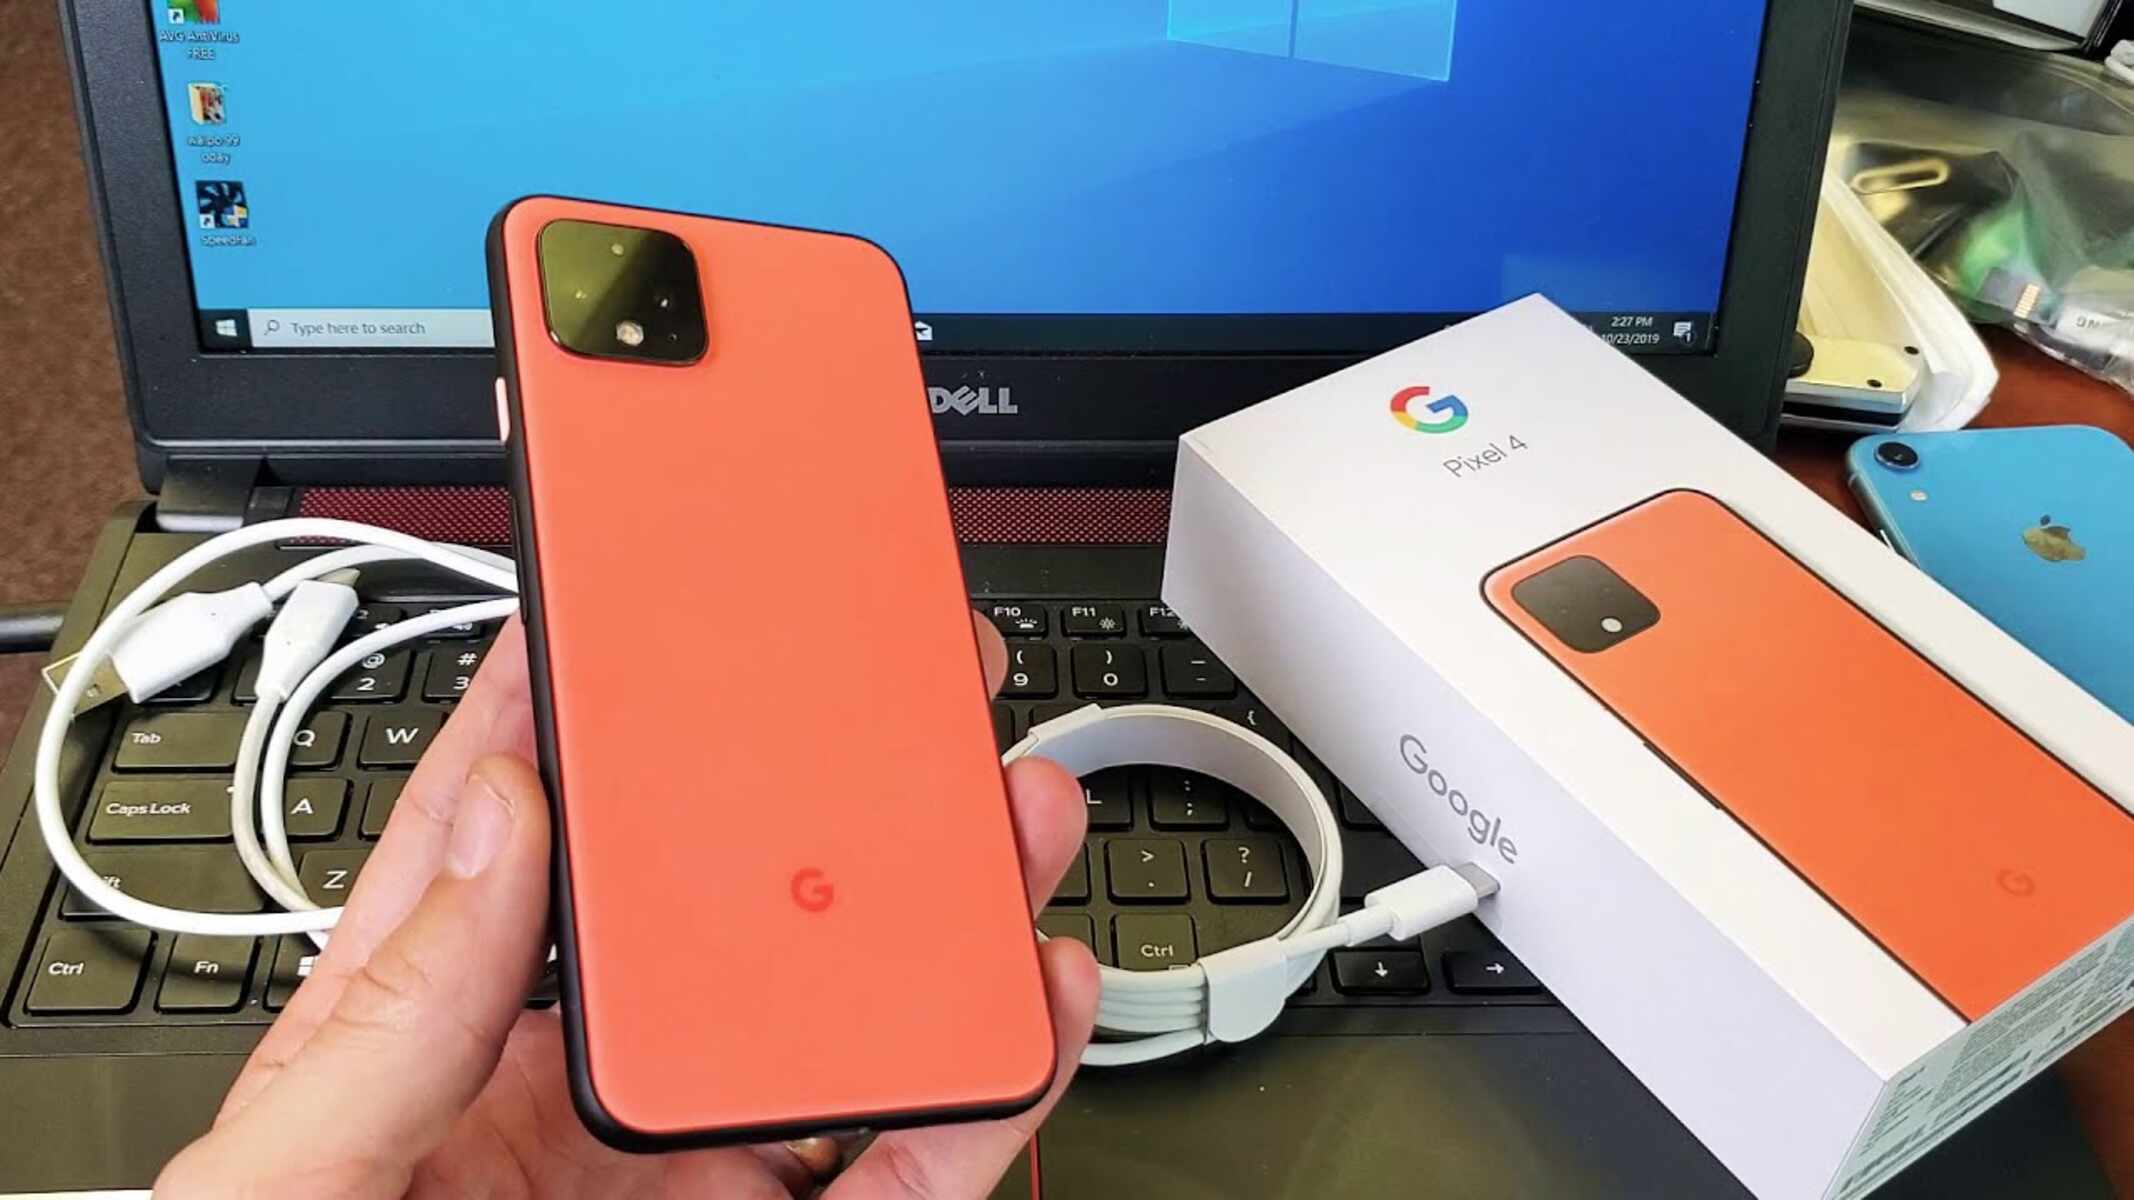 Connecting Pixel 4 To Computer: Step-by-Step Guide